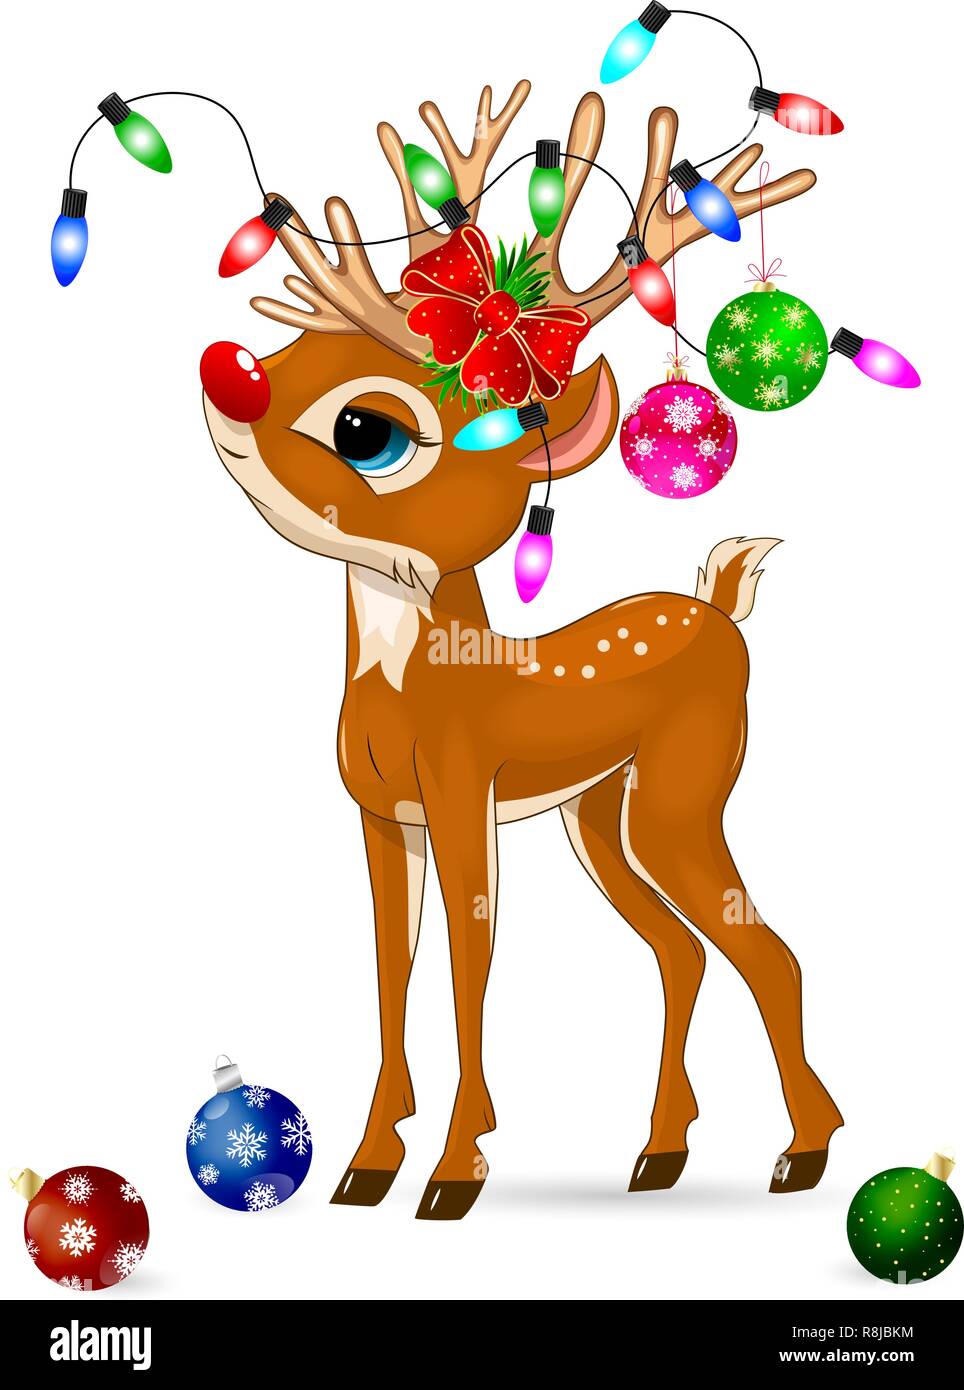 Little Cartoon Deer With Christmas Decorations On A White Background Deer Baby With A Red Nose Stock Vector Image Art Alamy